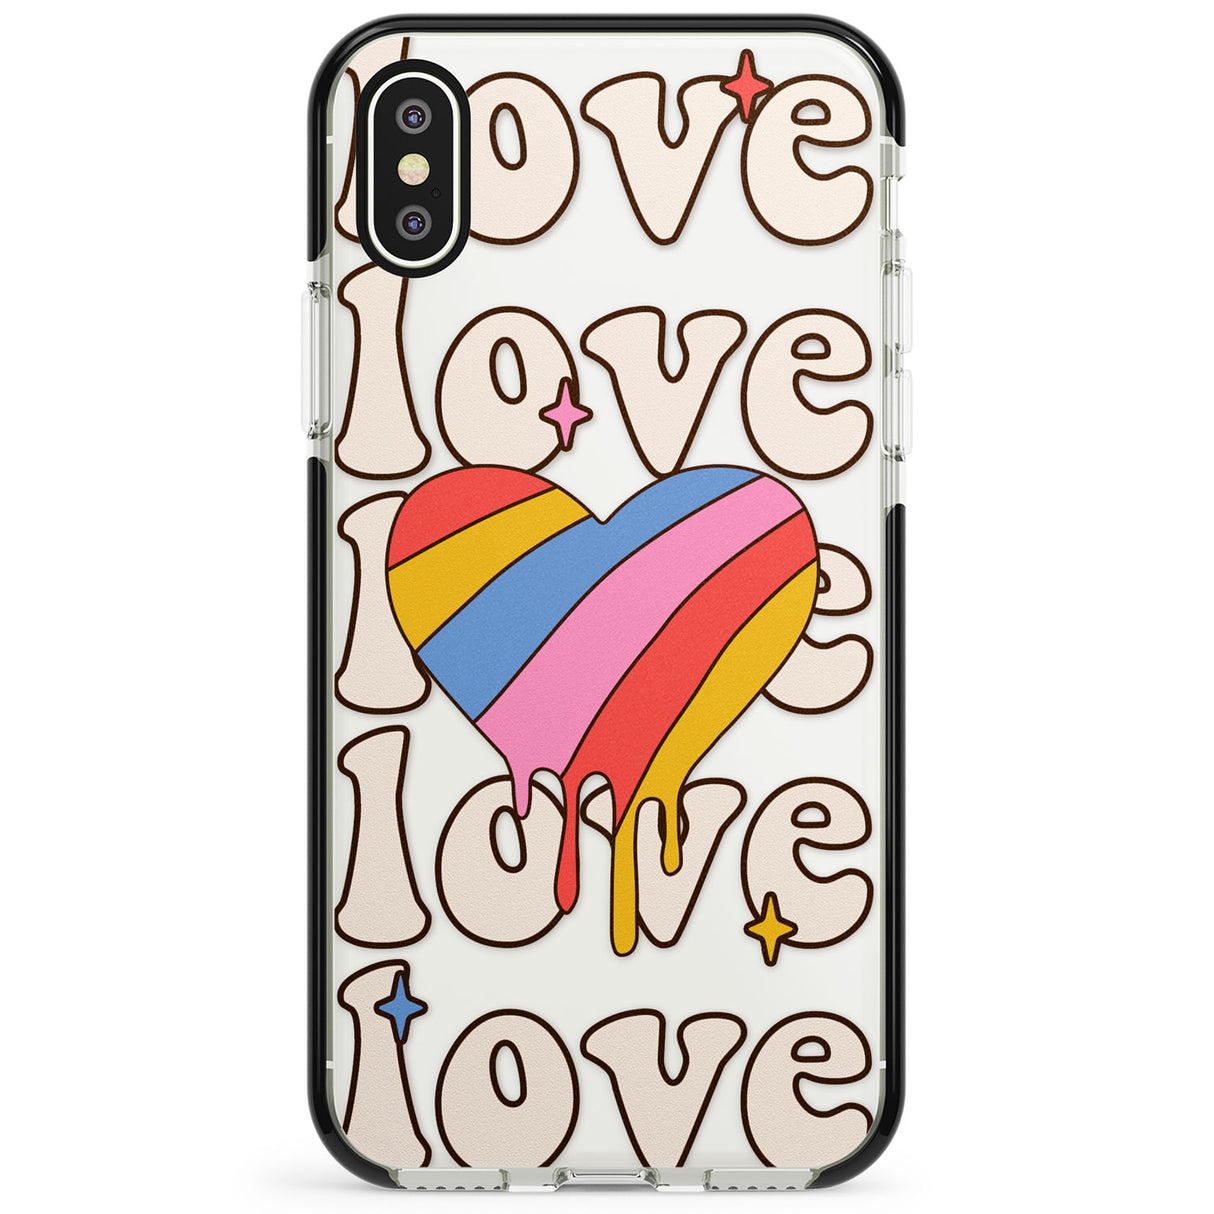 Groovy Love Phone Case for iPhone X XS Max XR